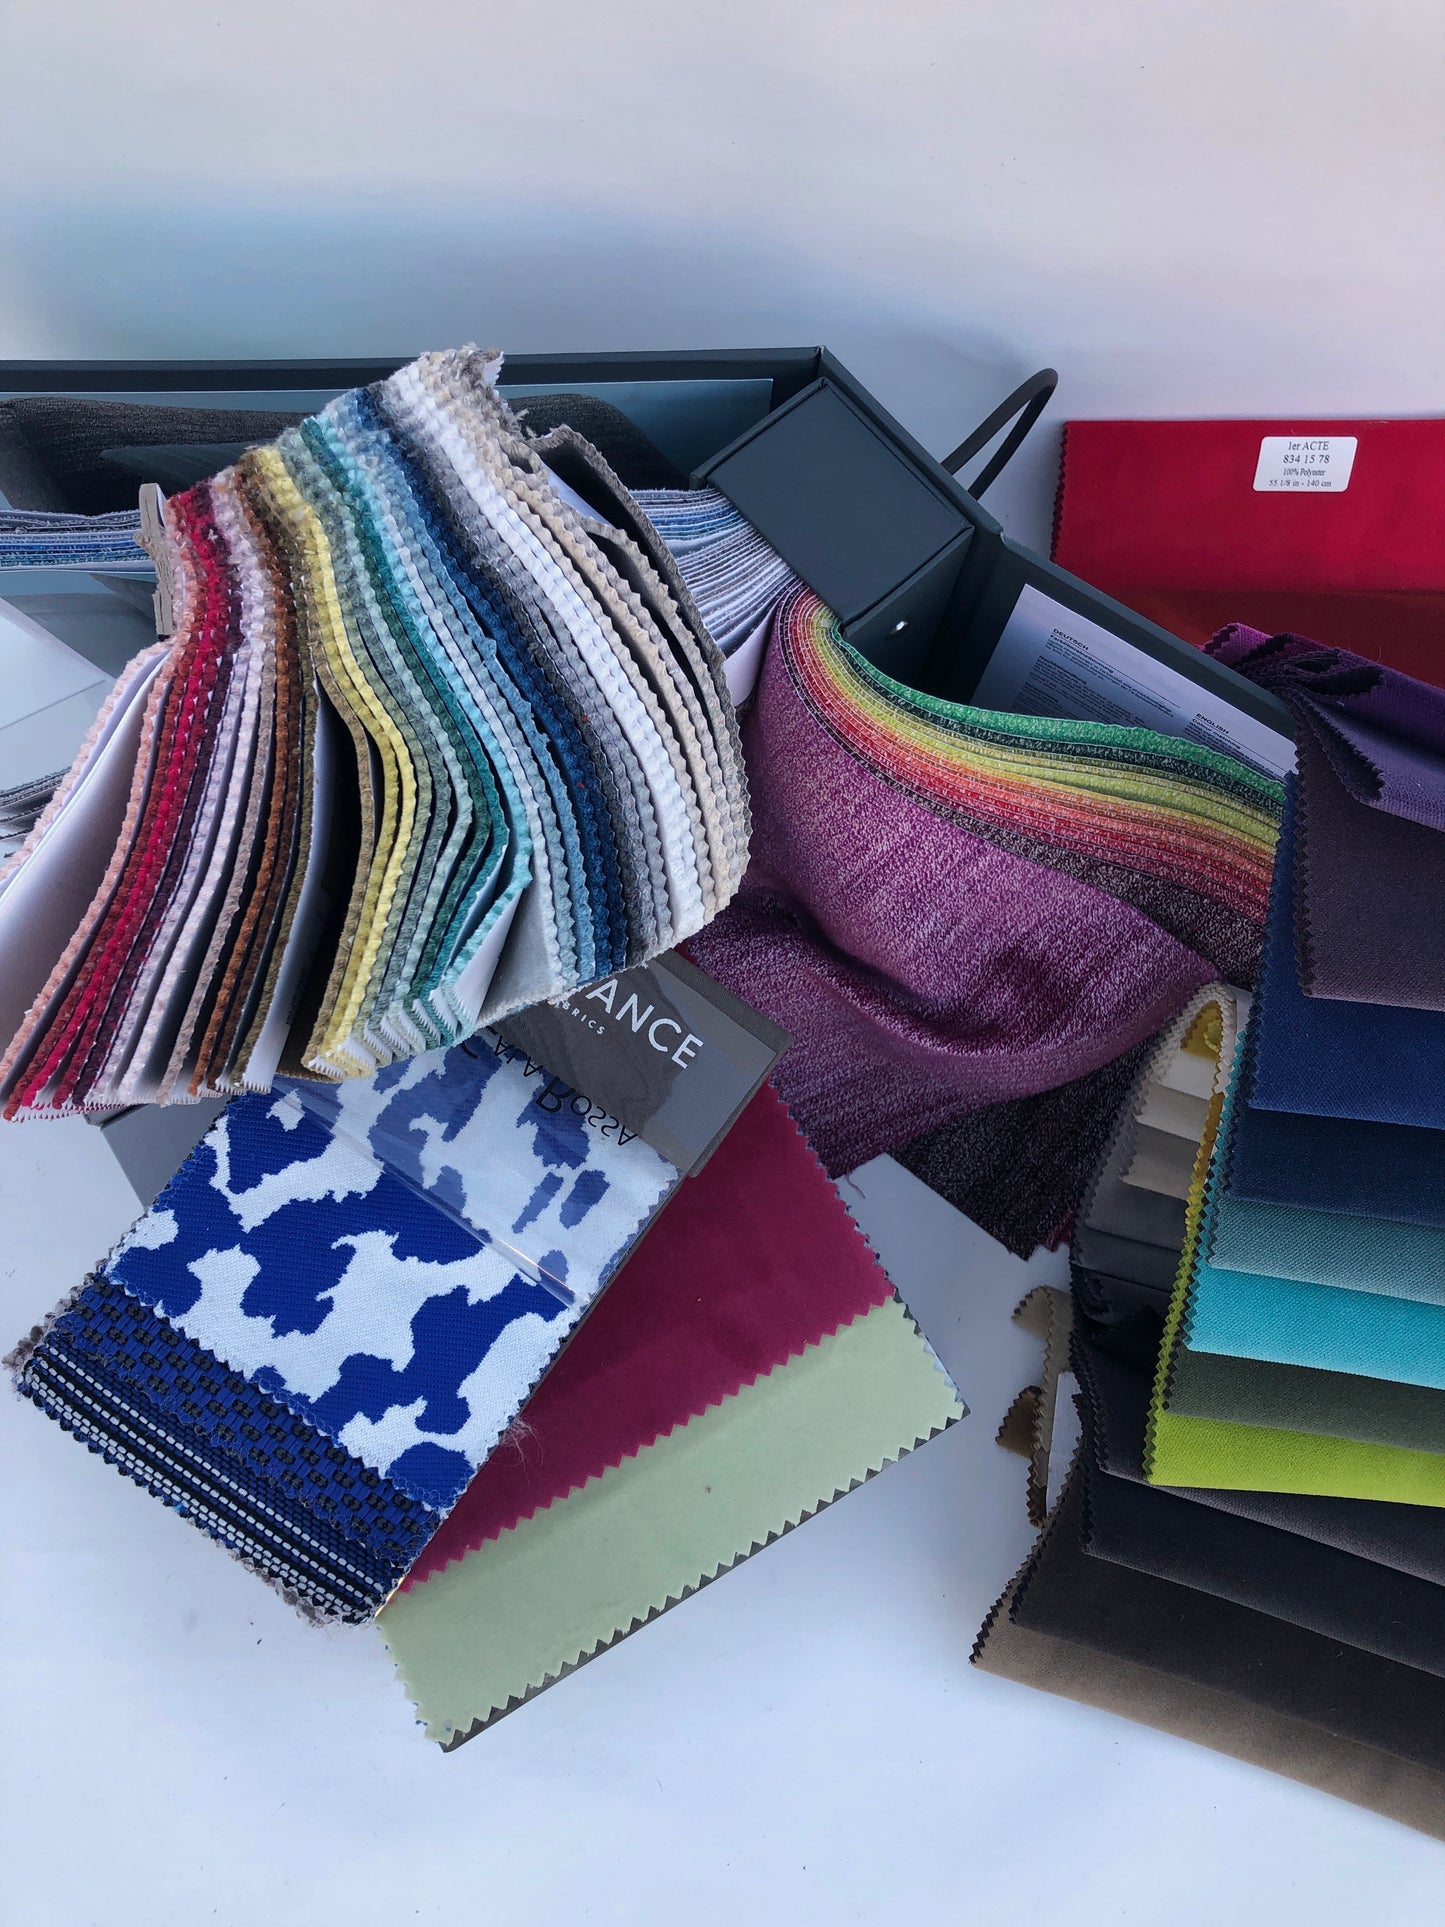 Fabric Swatches, Sample Books